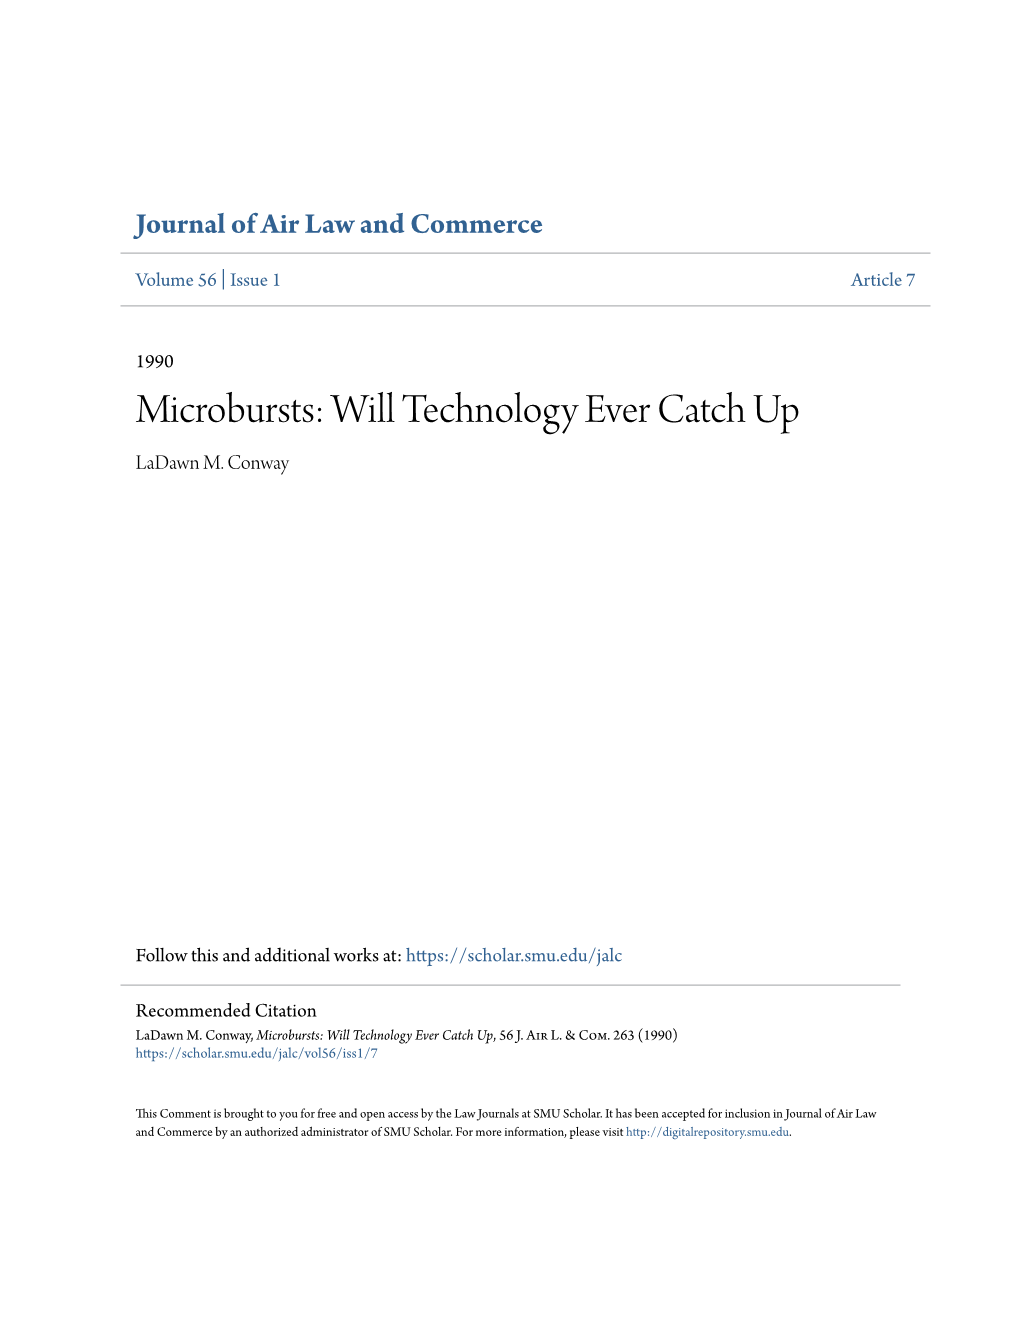 Microbursts: Will Technology Ever Catch up Ladawn M